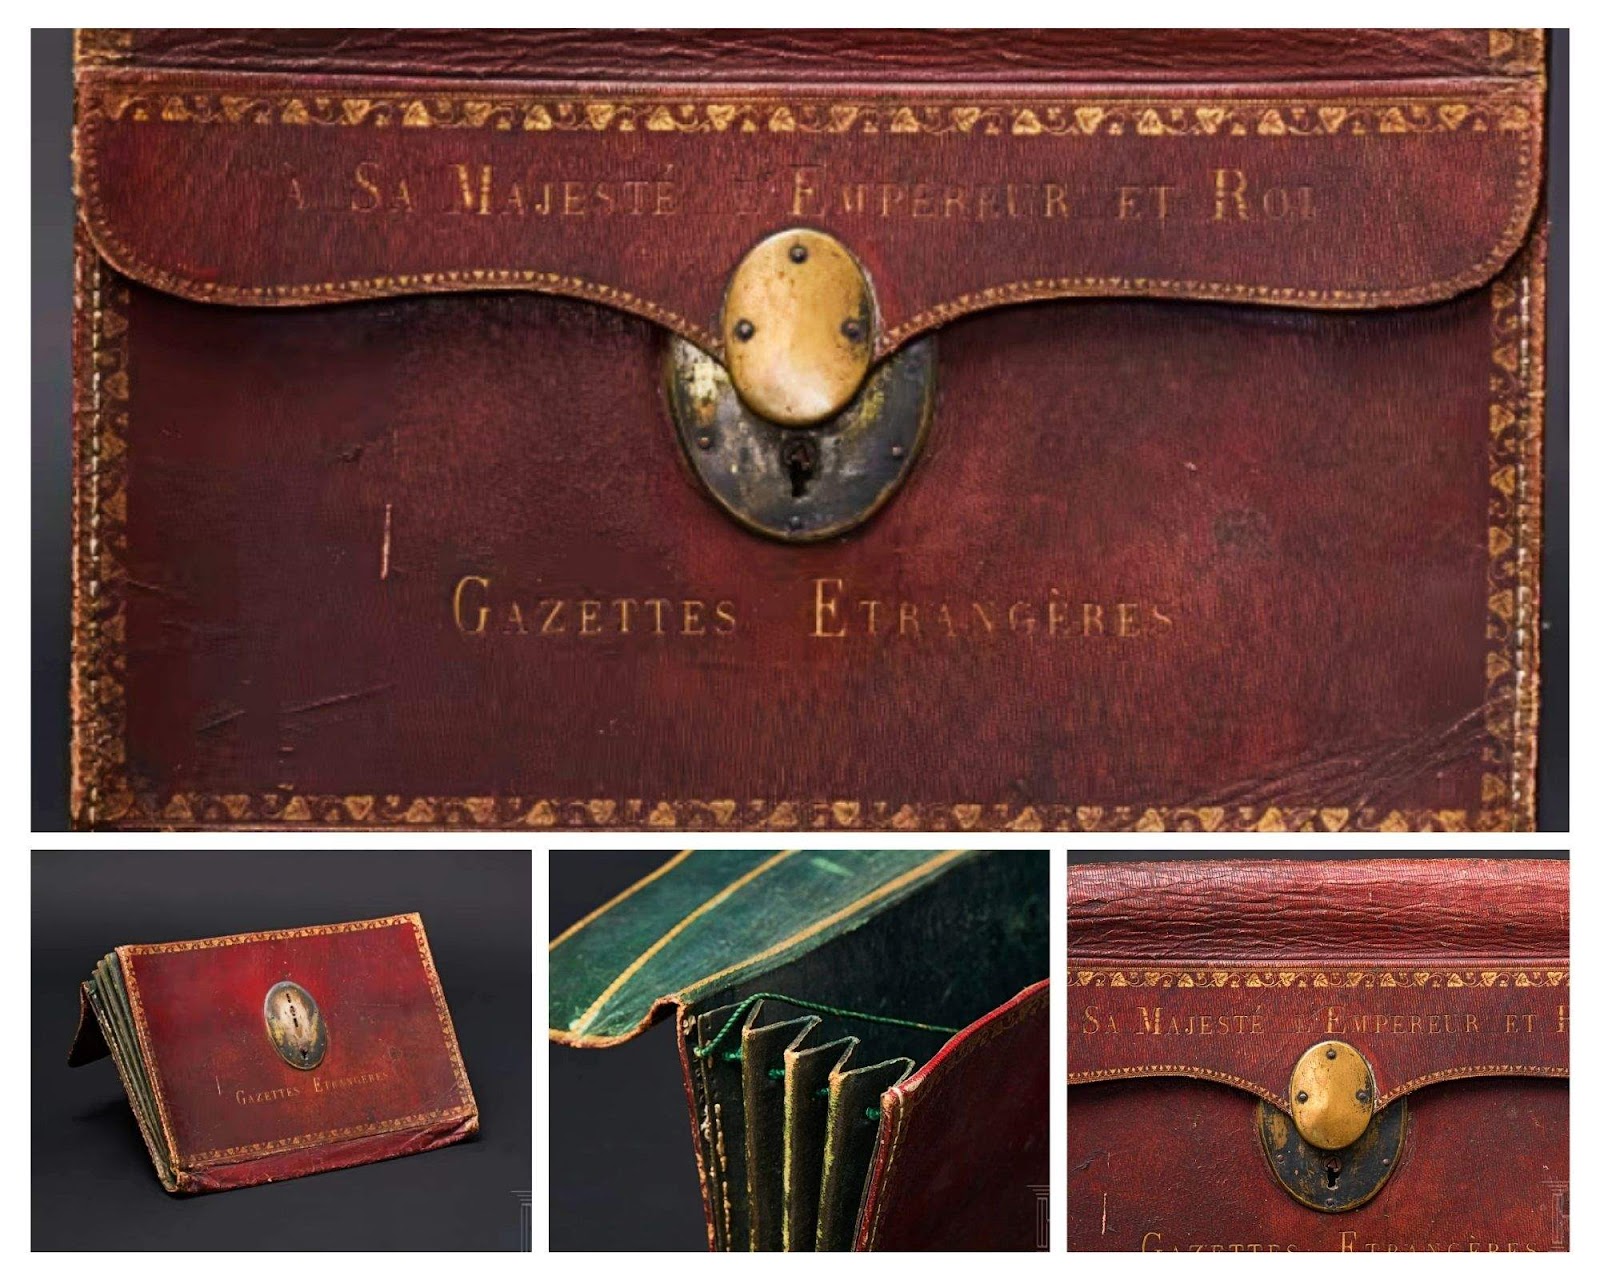 Napolean Bonaparte's portfolio filled with intelligence from the Black Chamber